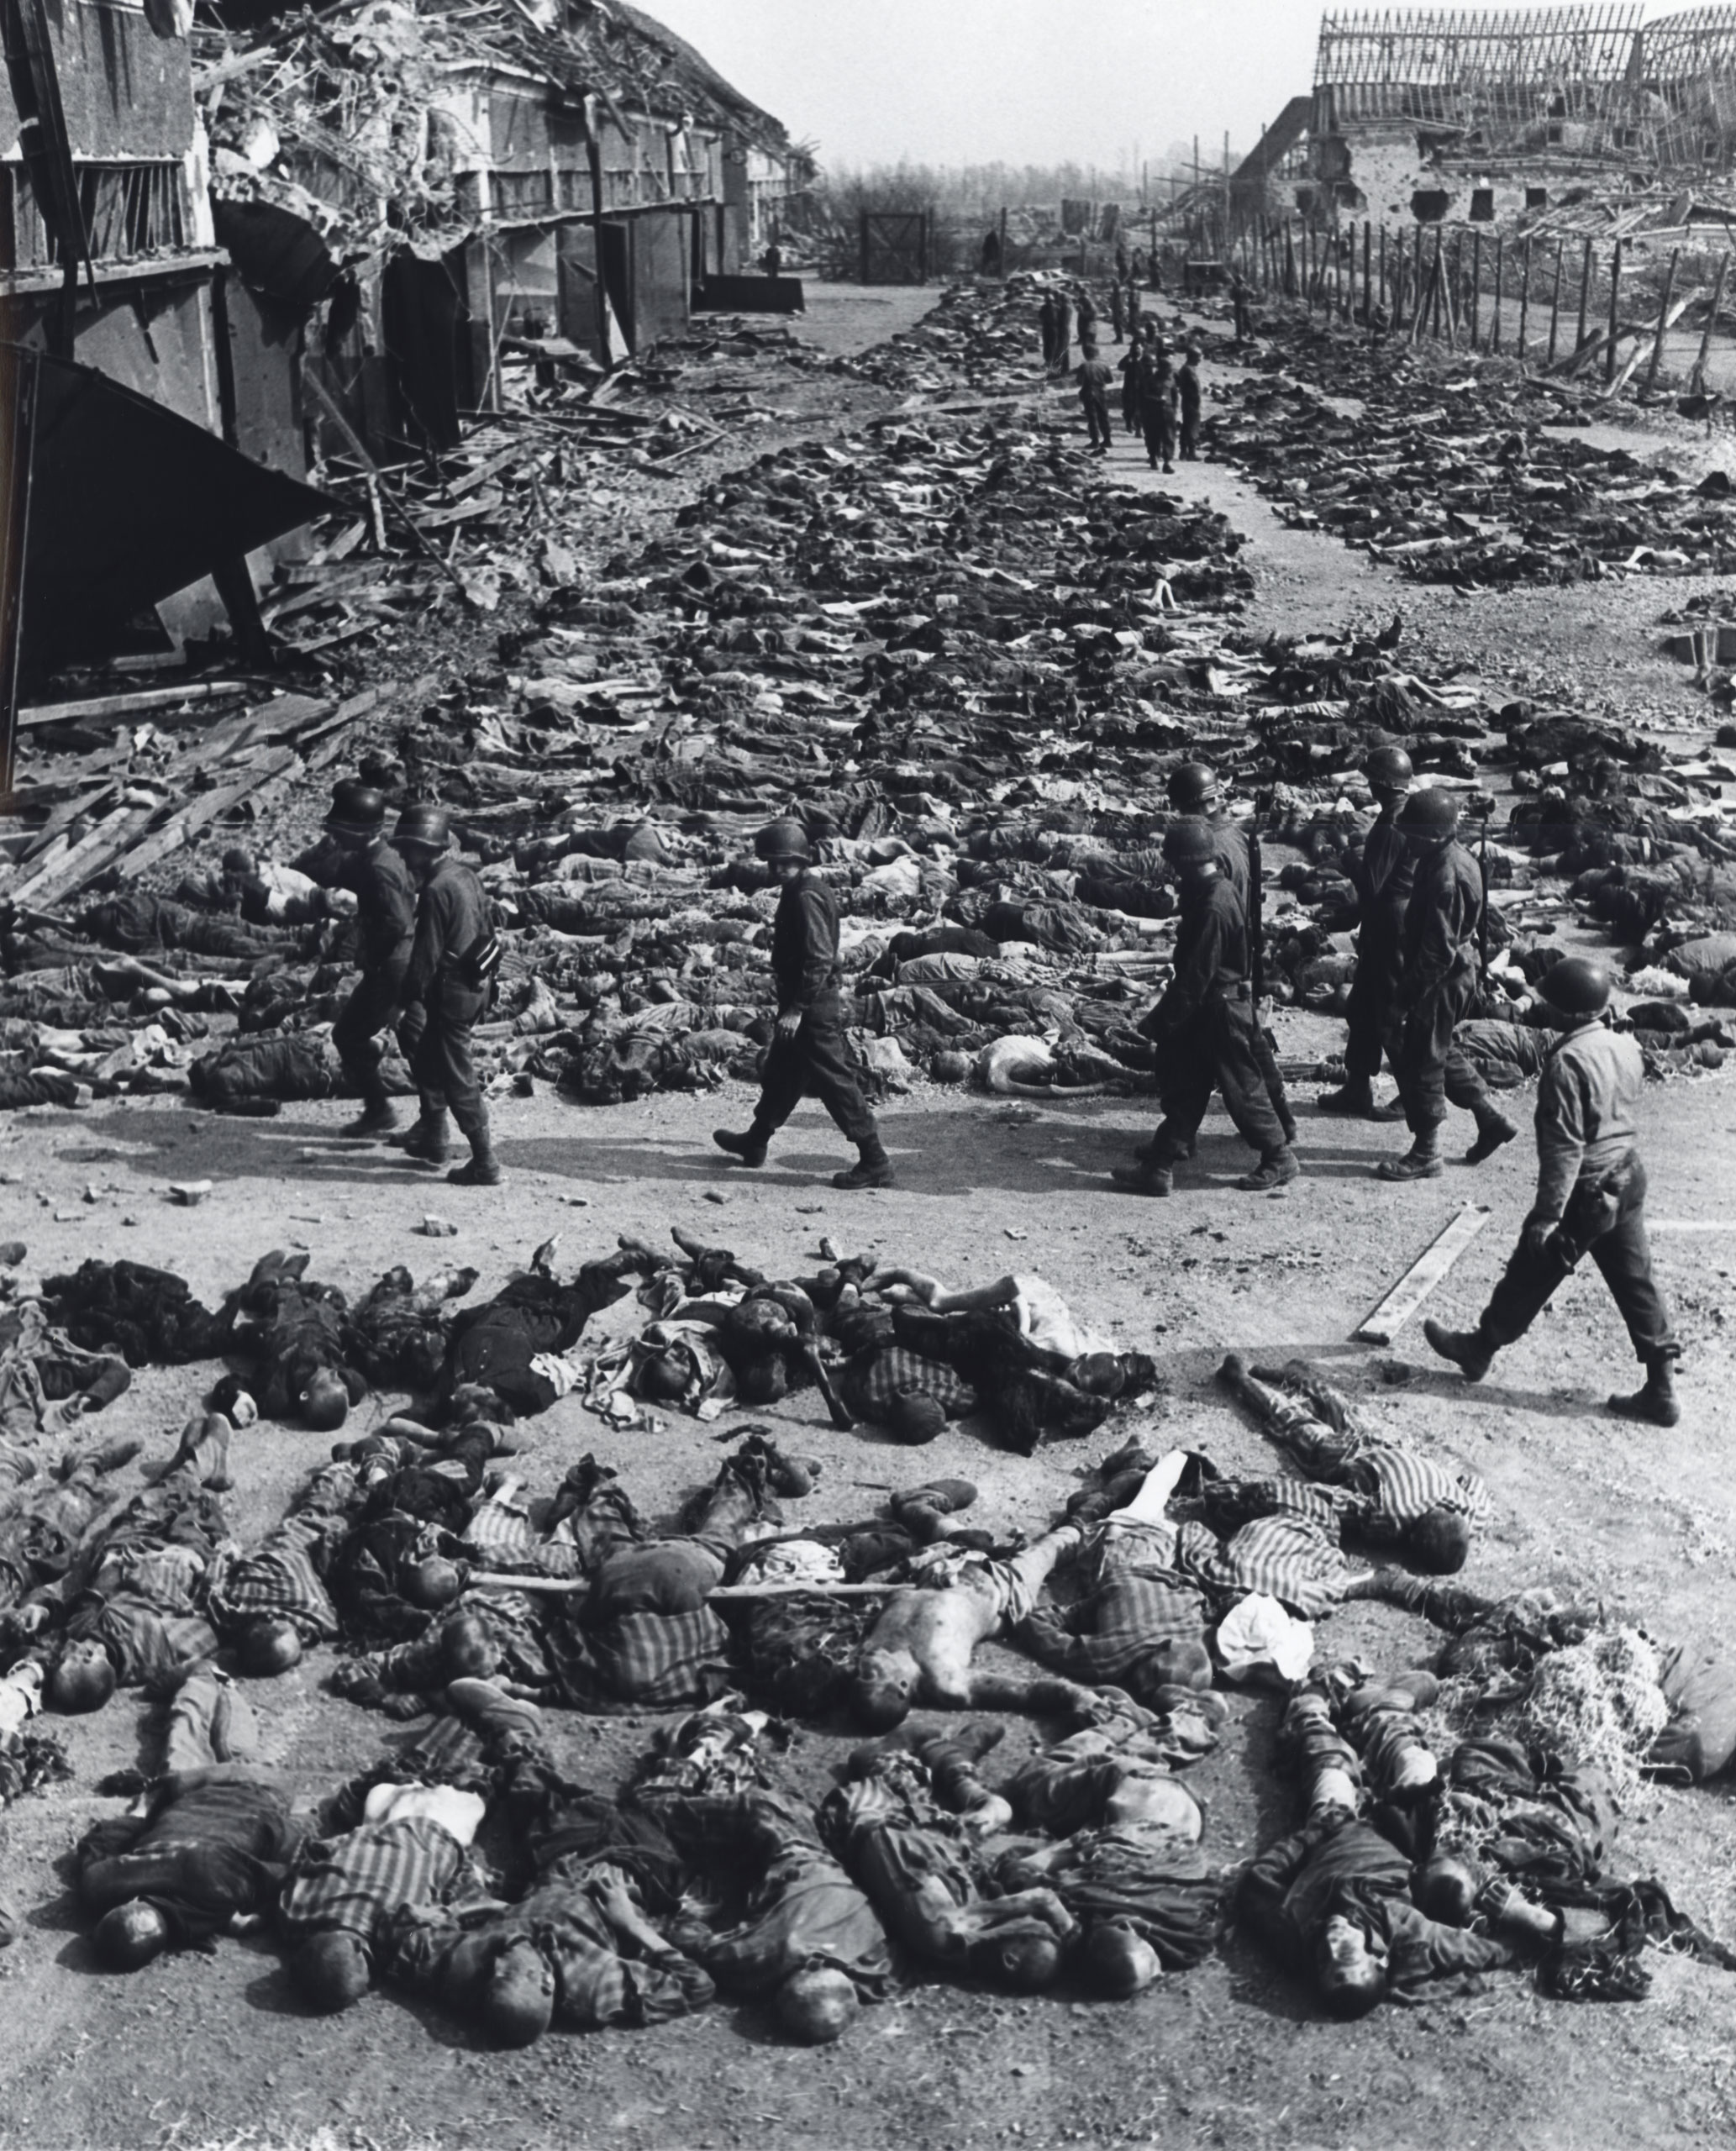 The Bodies of Almost 3,000 Slave Laborers Are Laid Out Along a Bombed Street before Burial by U.S. troops, Nordhausen, Germany, April 12, 1945